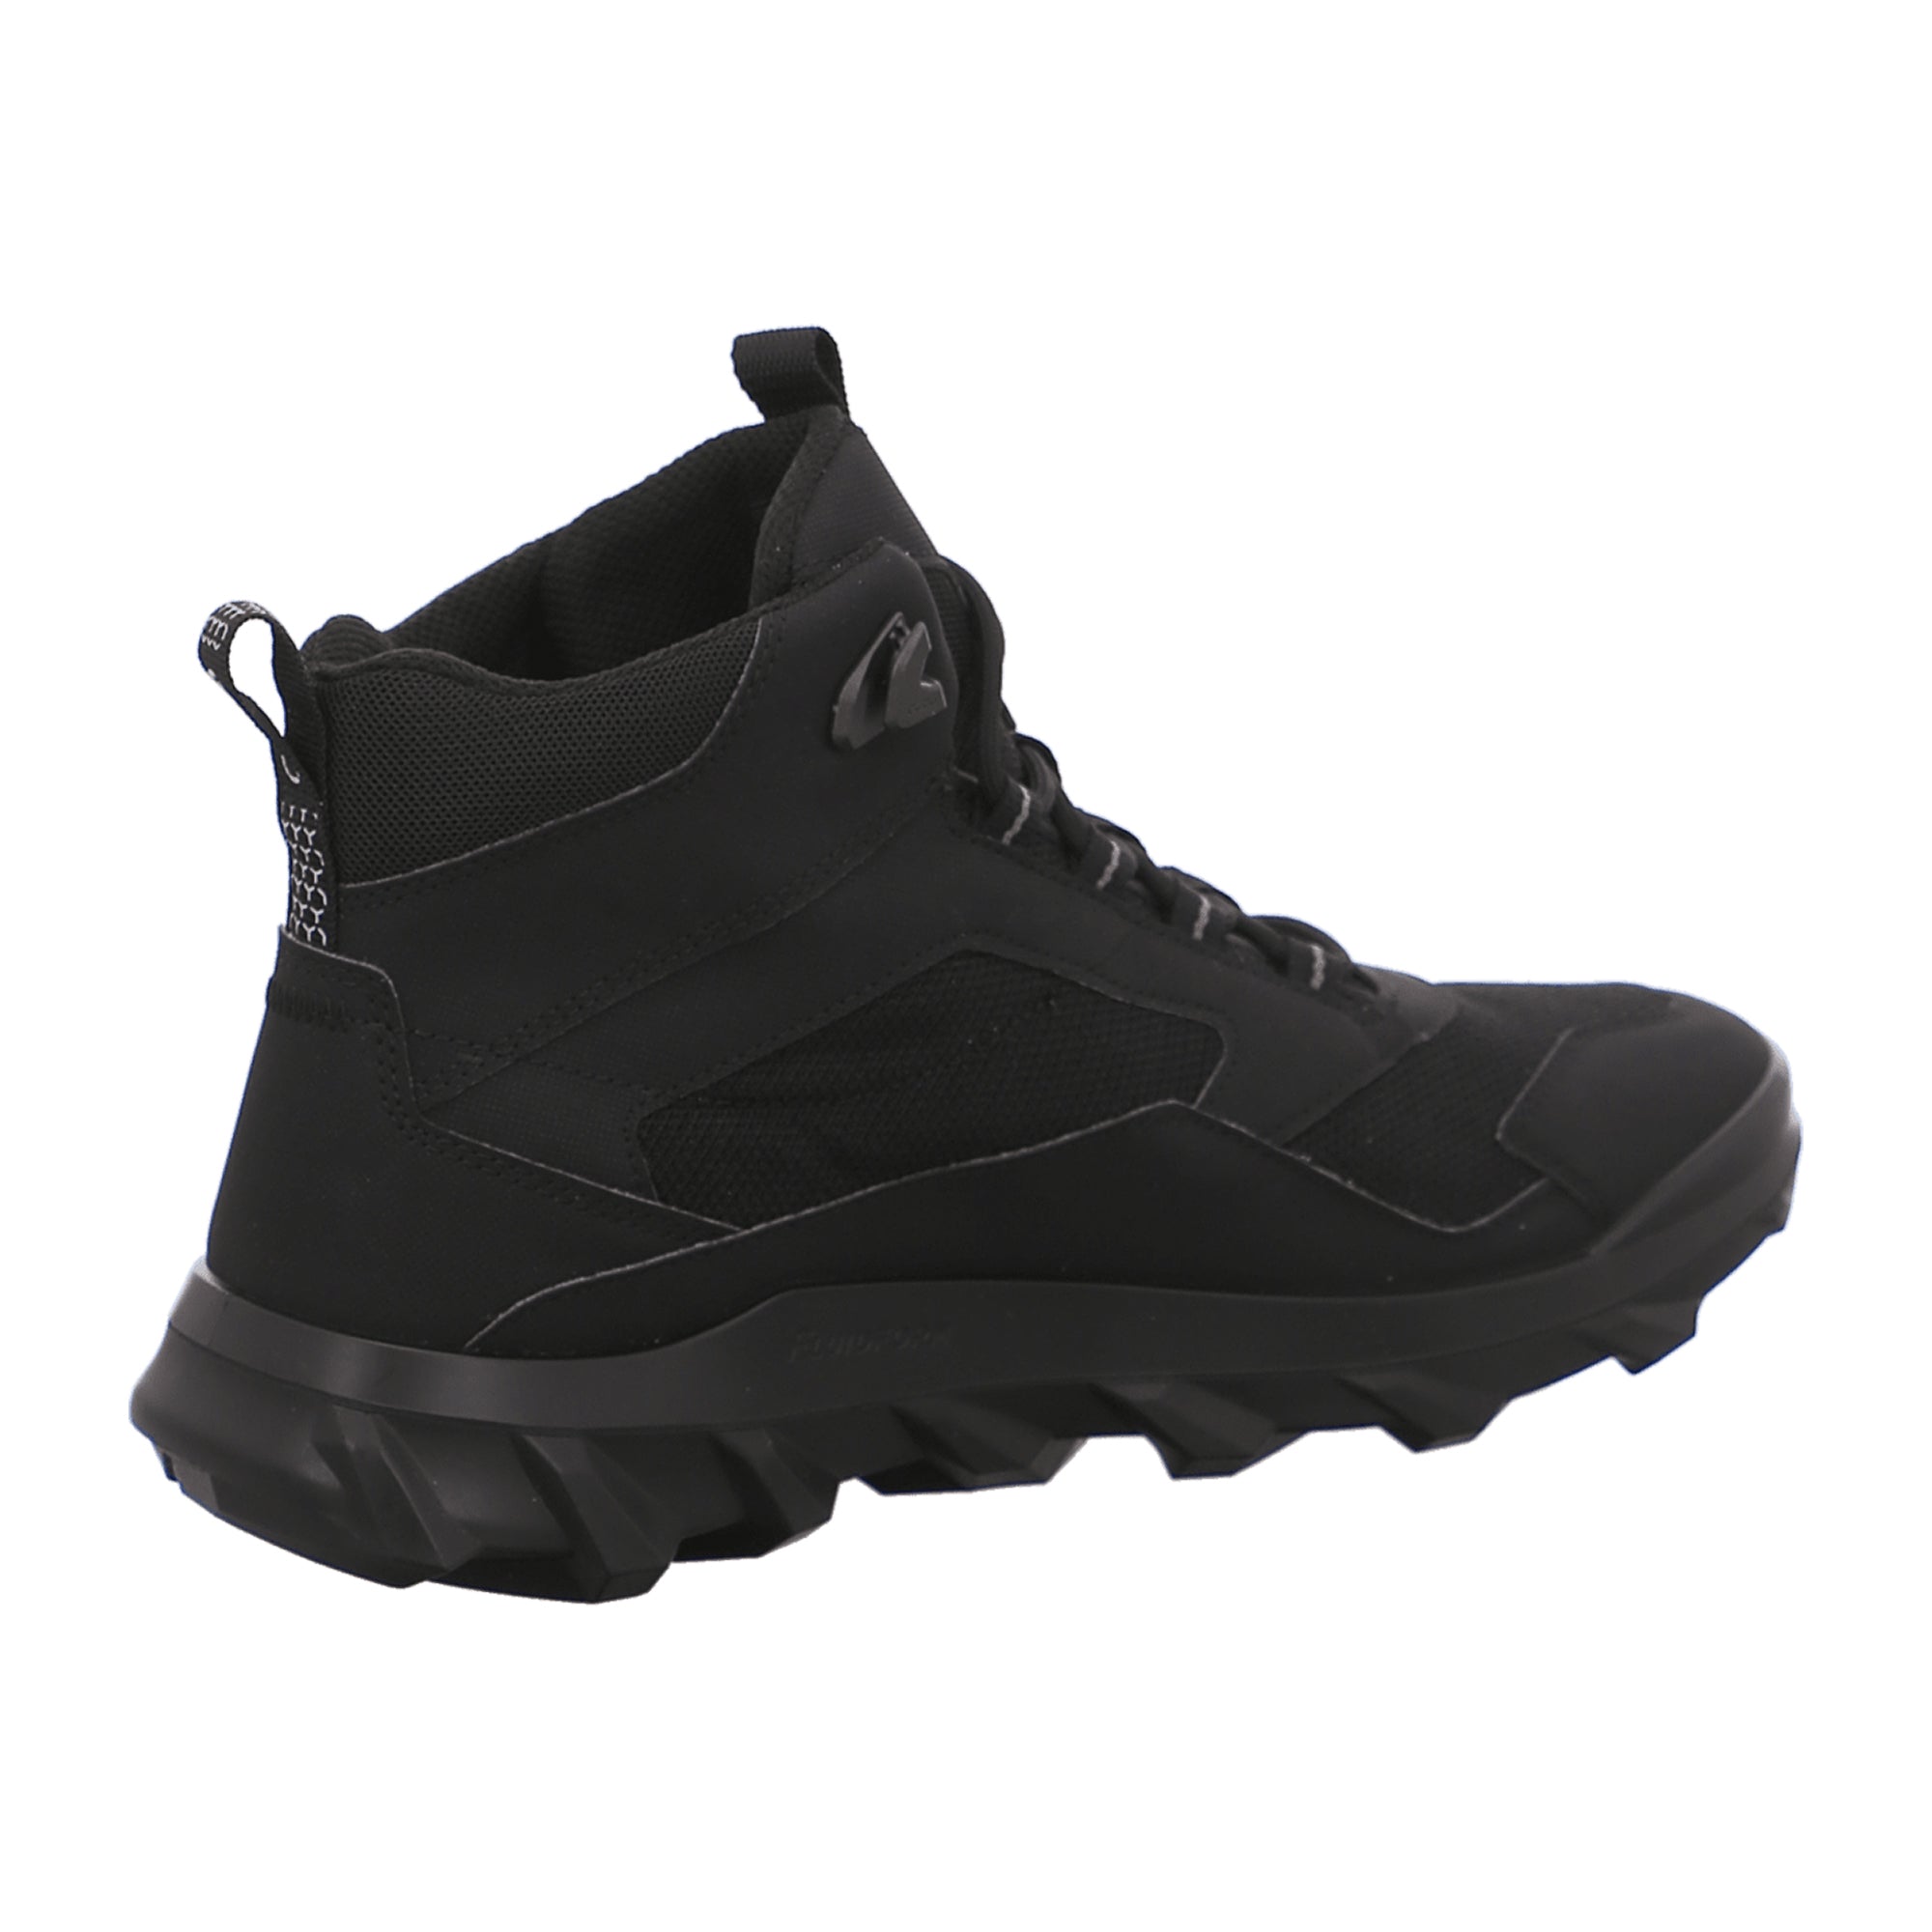 Ecco MX Men's Outdoor Shoes, Durable and Stylish - Black